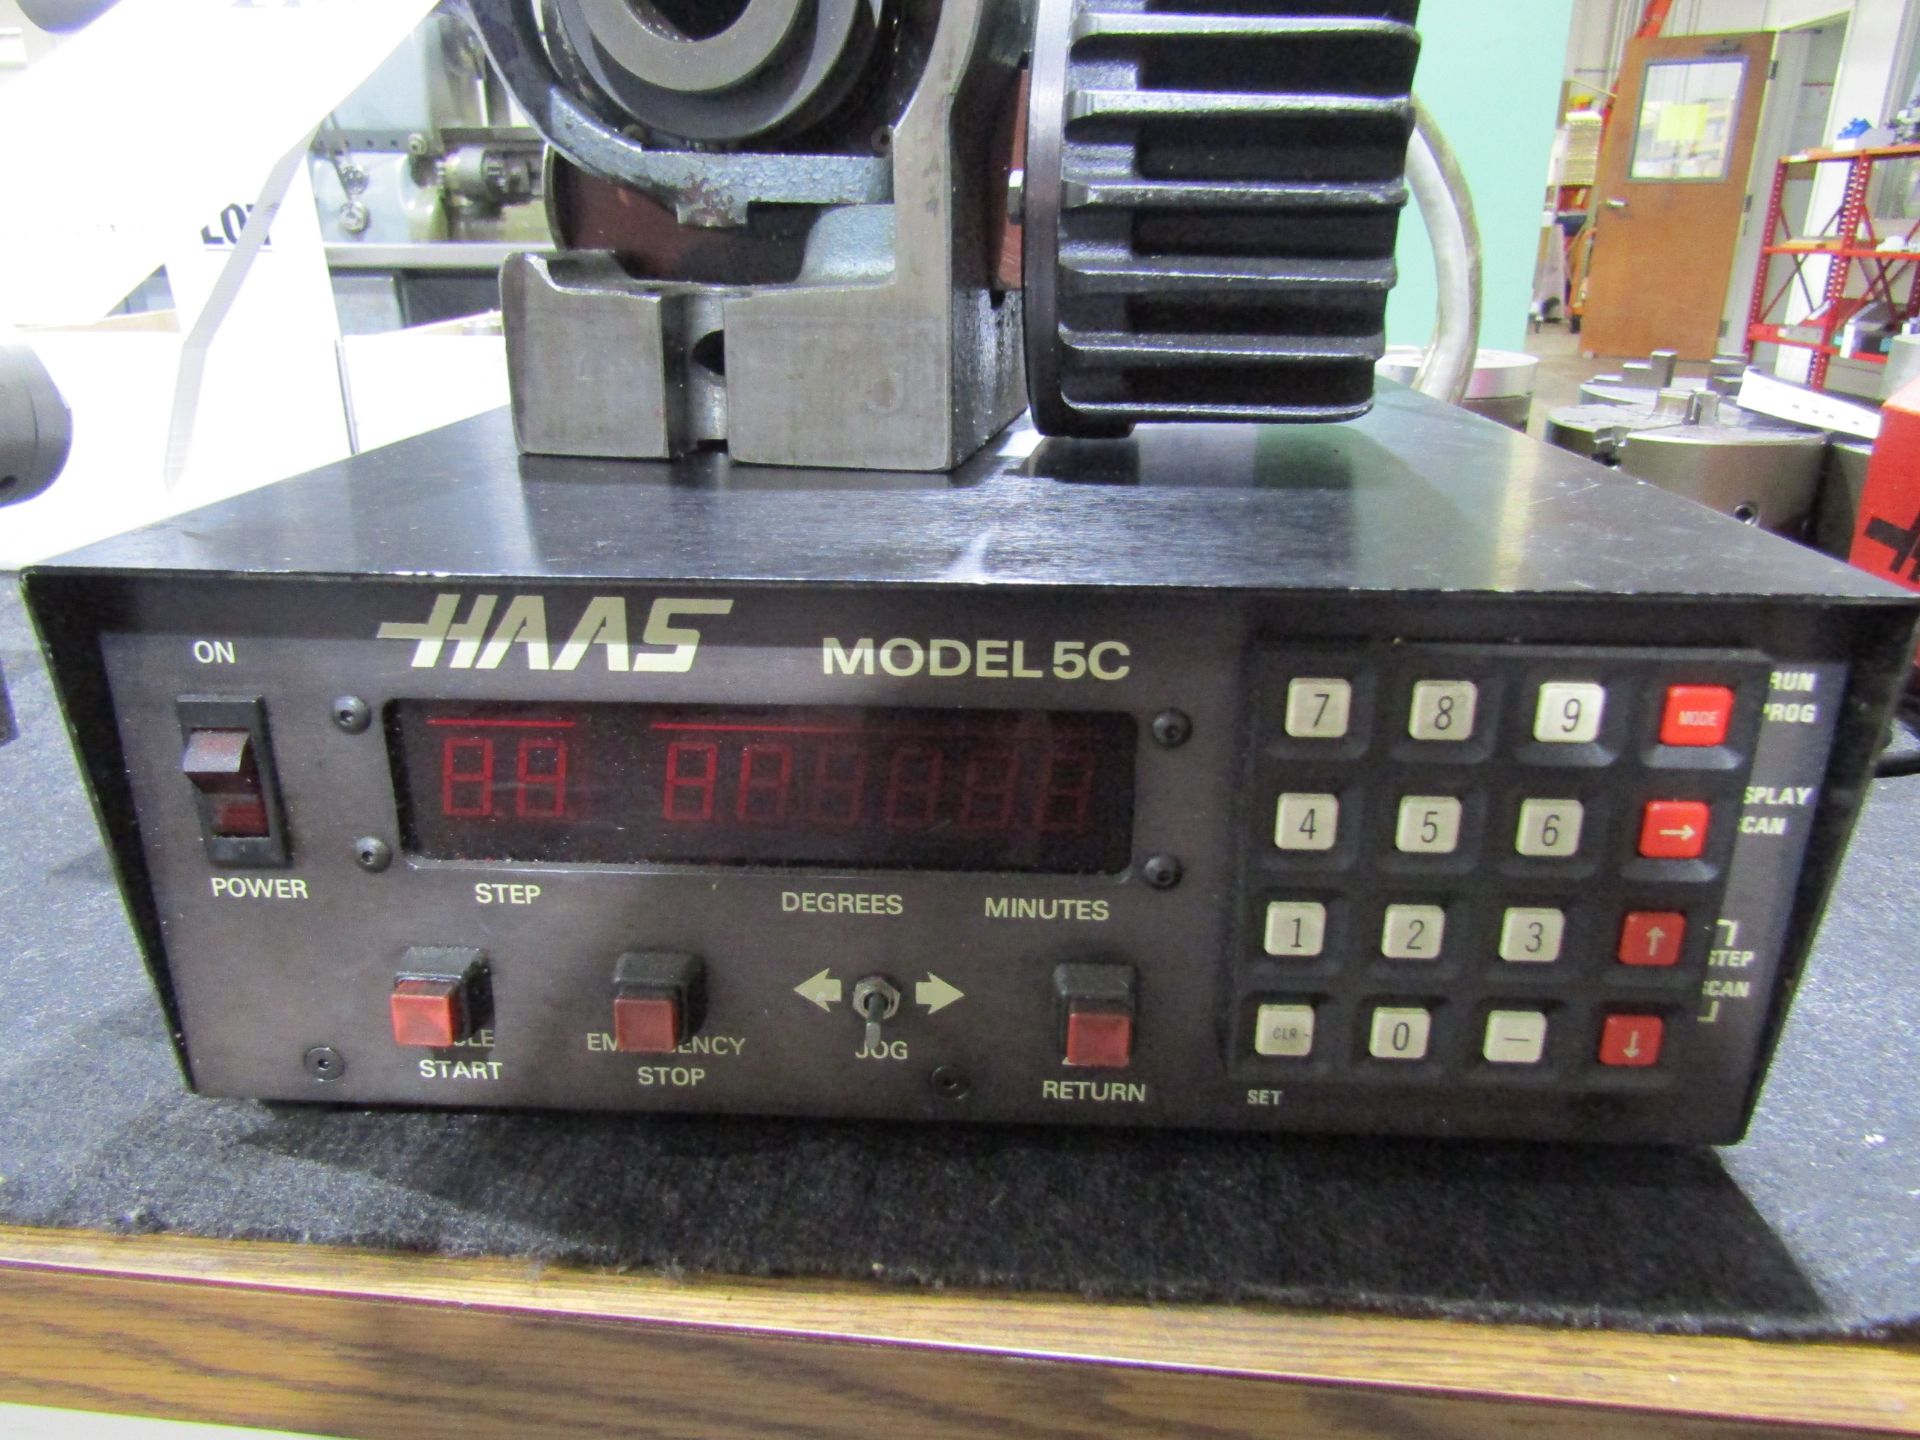 HAAS PROGRAMMABLE COLLET INDEXER, SERIAL 8455, HAAS MODEL 5C SYSTEM - Image 2 of 4